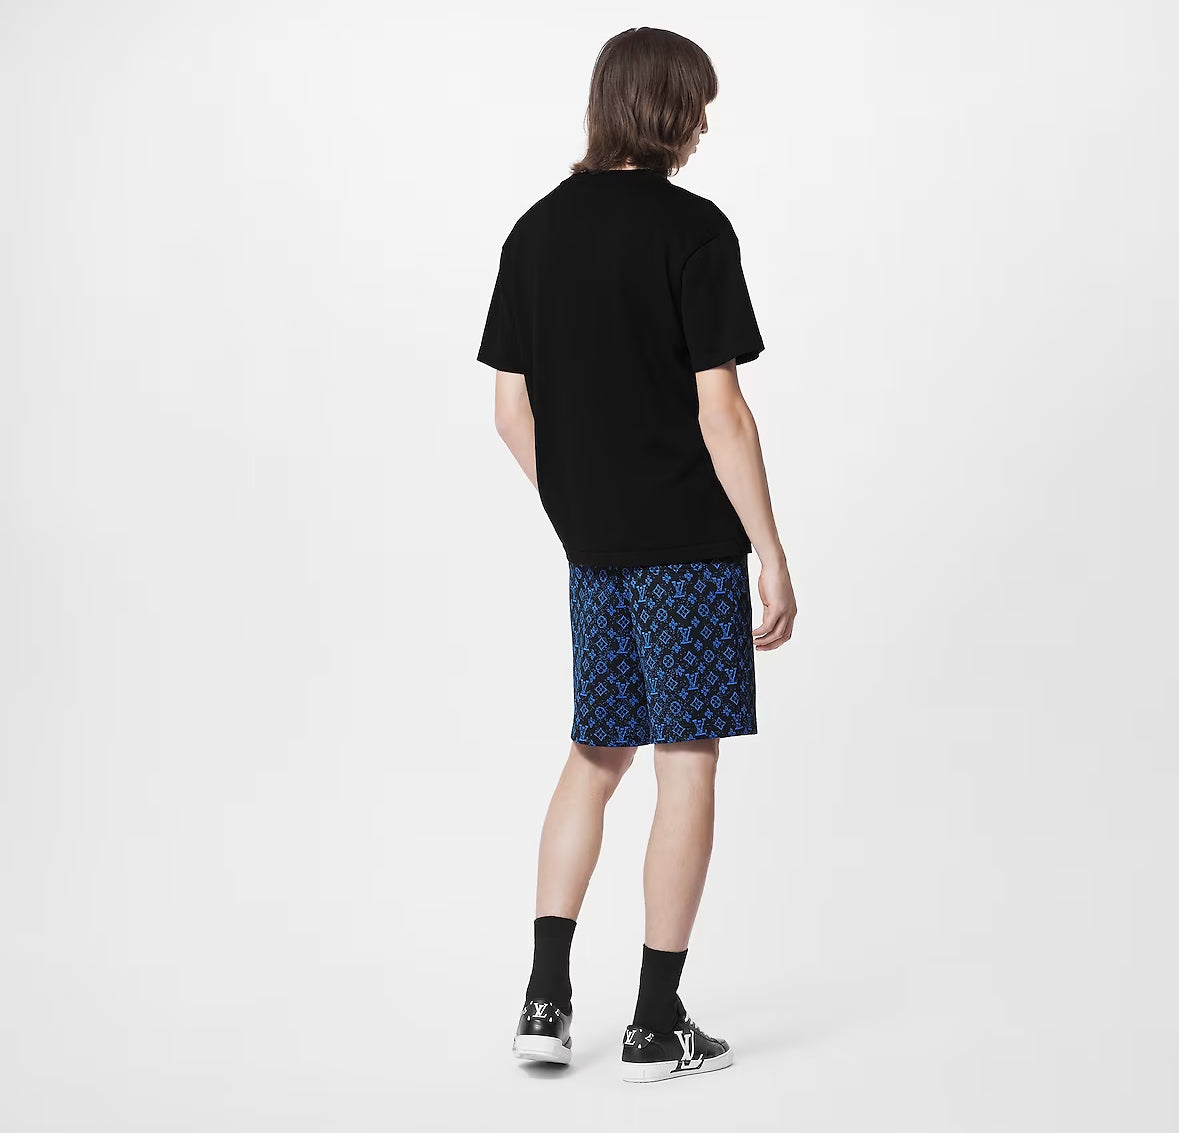 Tyler, The Creator x Louis Vuitton Embroidered Signature Short-Sleeved Cotton T-Shirt “Black”